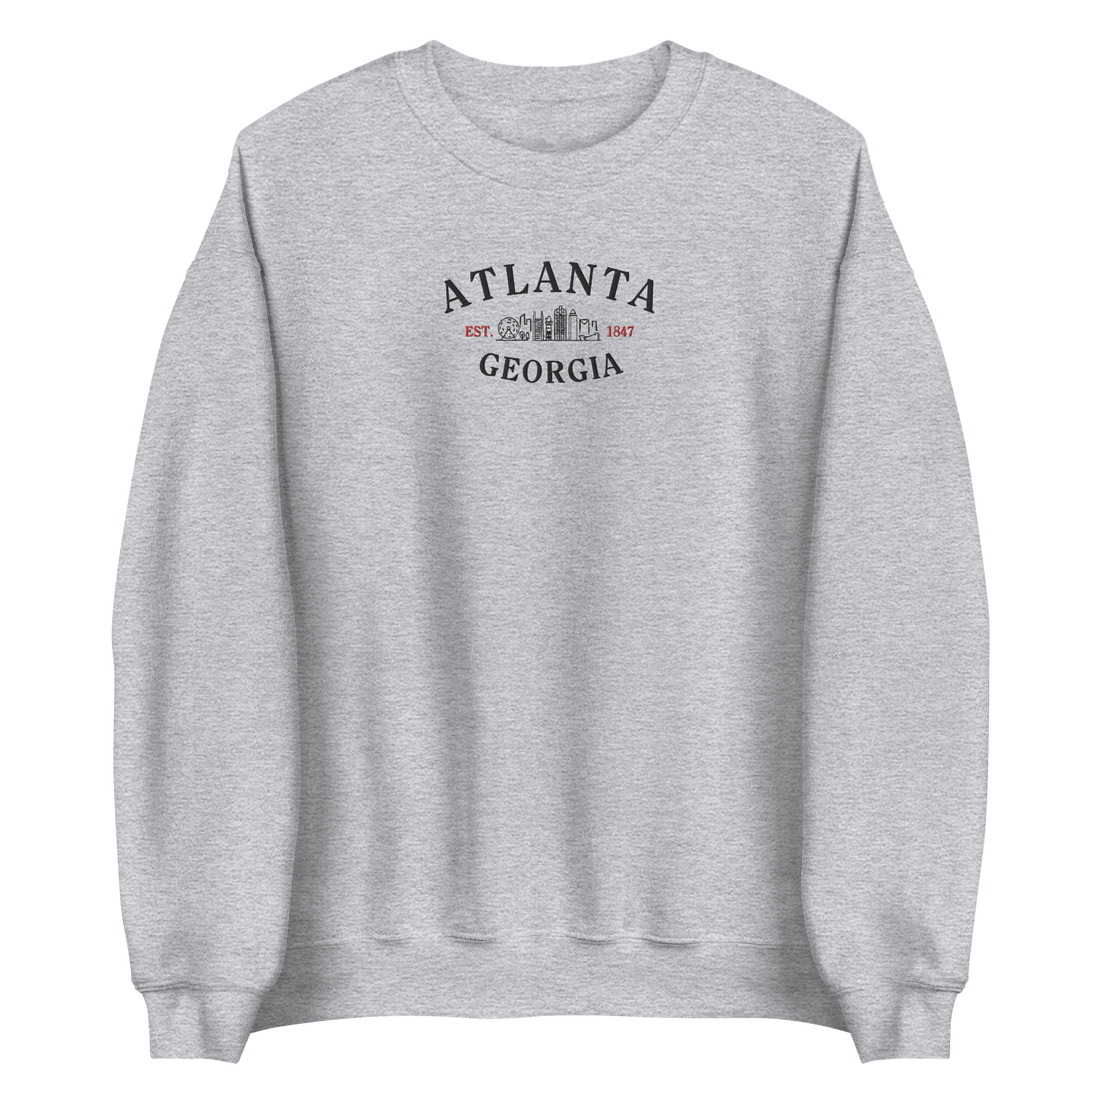 MiddleGrounds-Atlanta-apparel-and-clothing-Georgia-state-outline-sweater-urban-branded-merch